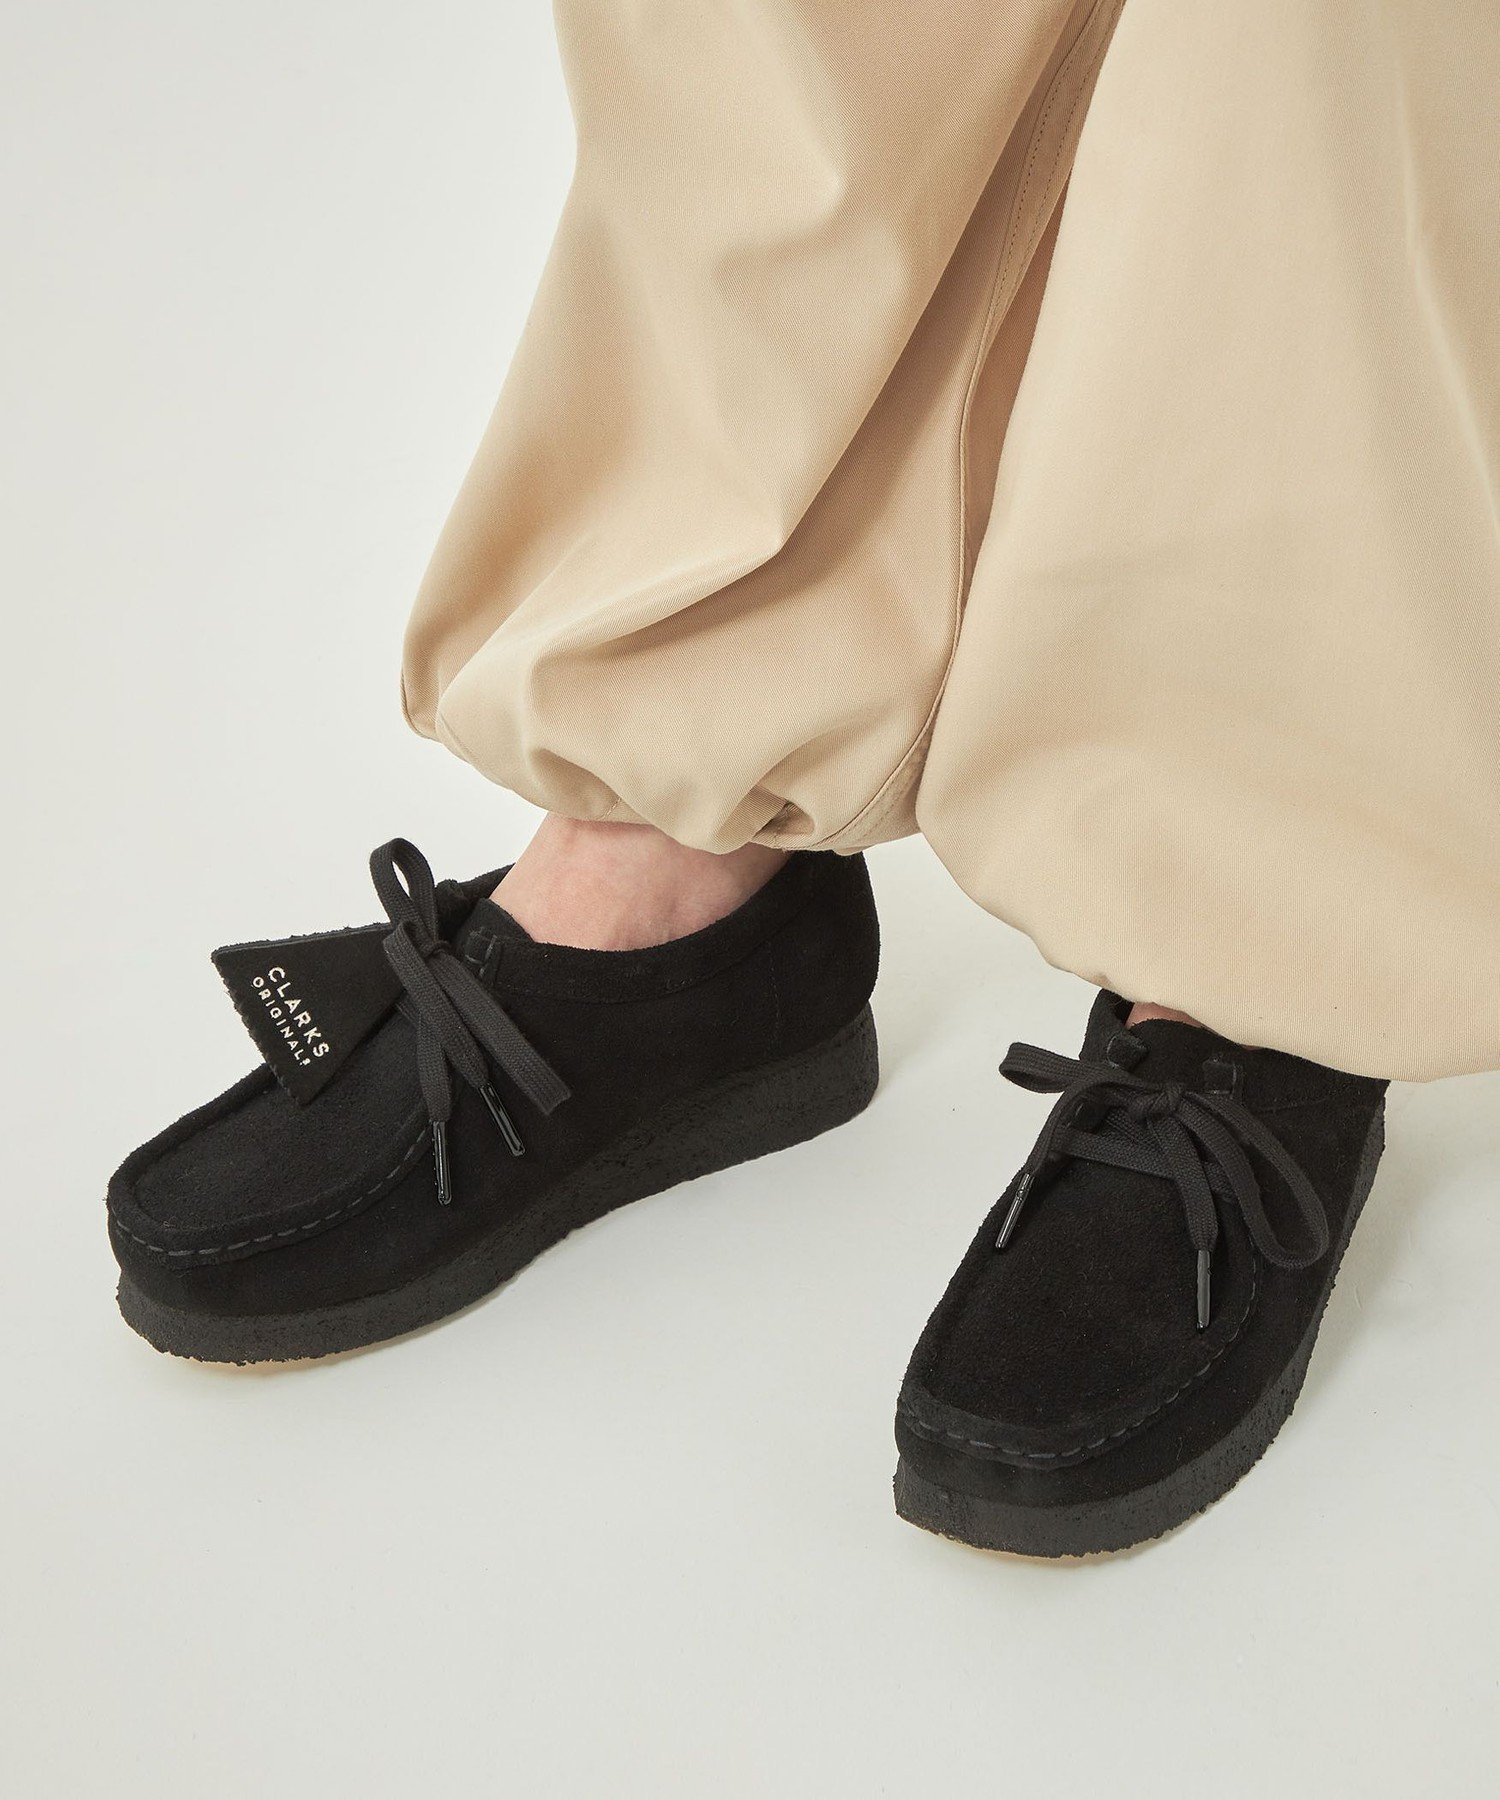 UNITED ARROWS green label relaxing｜【WEB限定】 Wallabee ワラビー